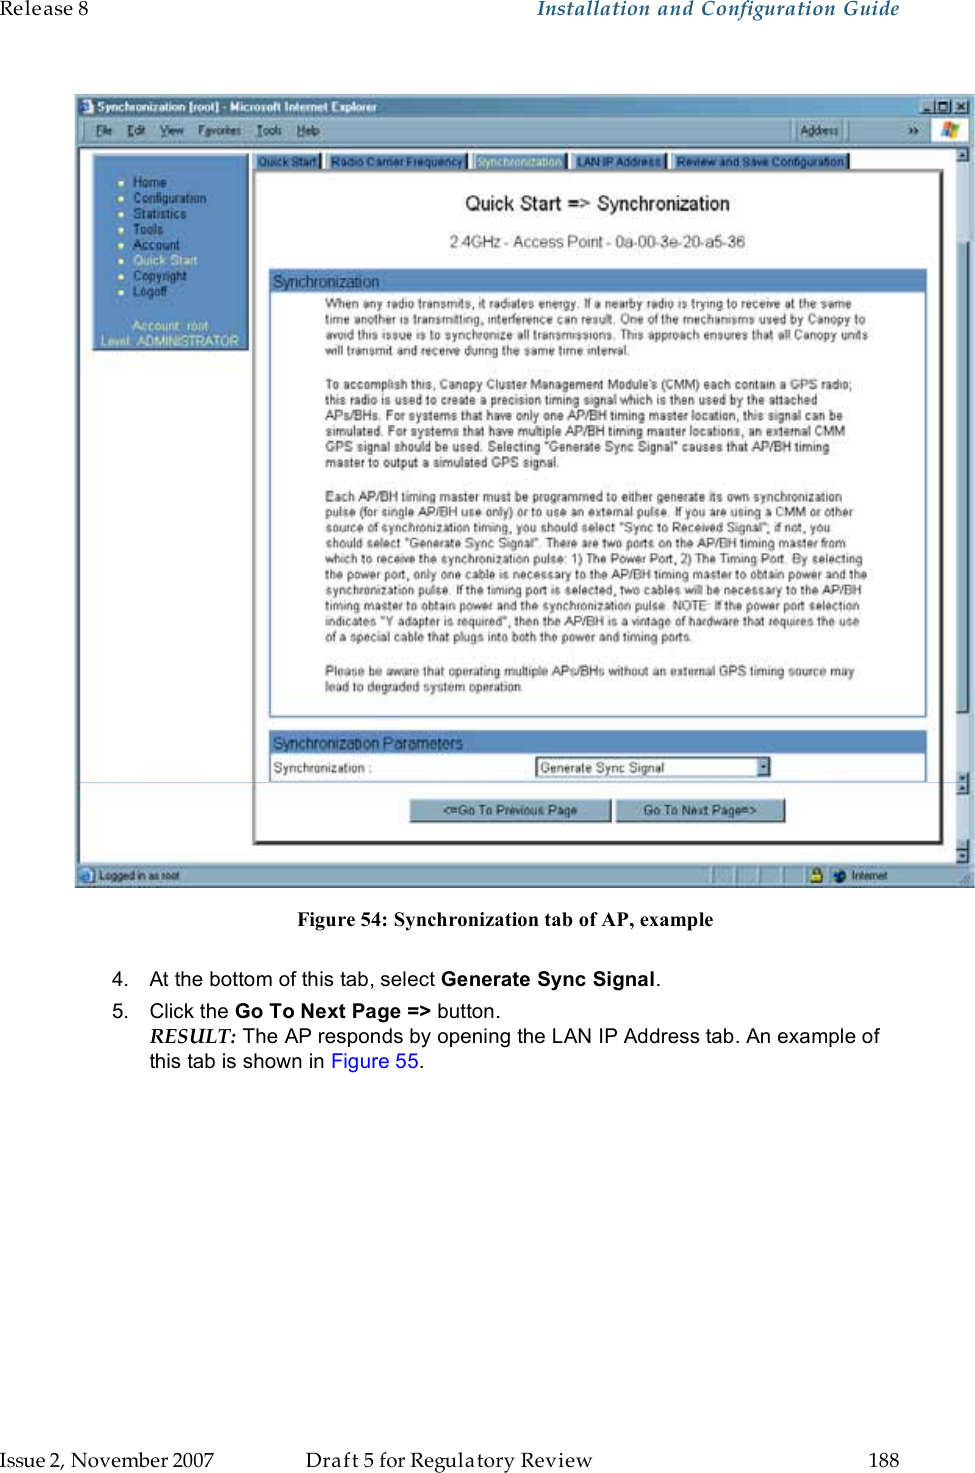 Release 8    Installation and Configuration Guide   Issue 2, November 2007  Draft 5 for Regulatory Review  188        Figure 54: Synchronization tab of AP, example   4.  At the bottom of this tab, select Generate Sync Signal. 5.  Click the Go To Next Page =&gt; button. RESULT: The AP responds by opening the LAN IP Address tab. An example of this tab is shown in Figure 55. 